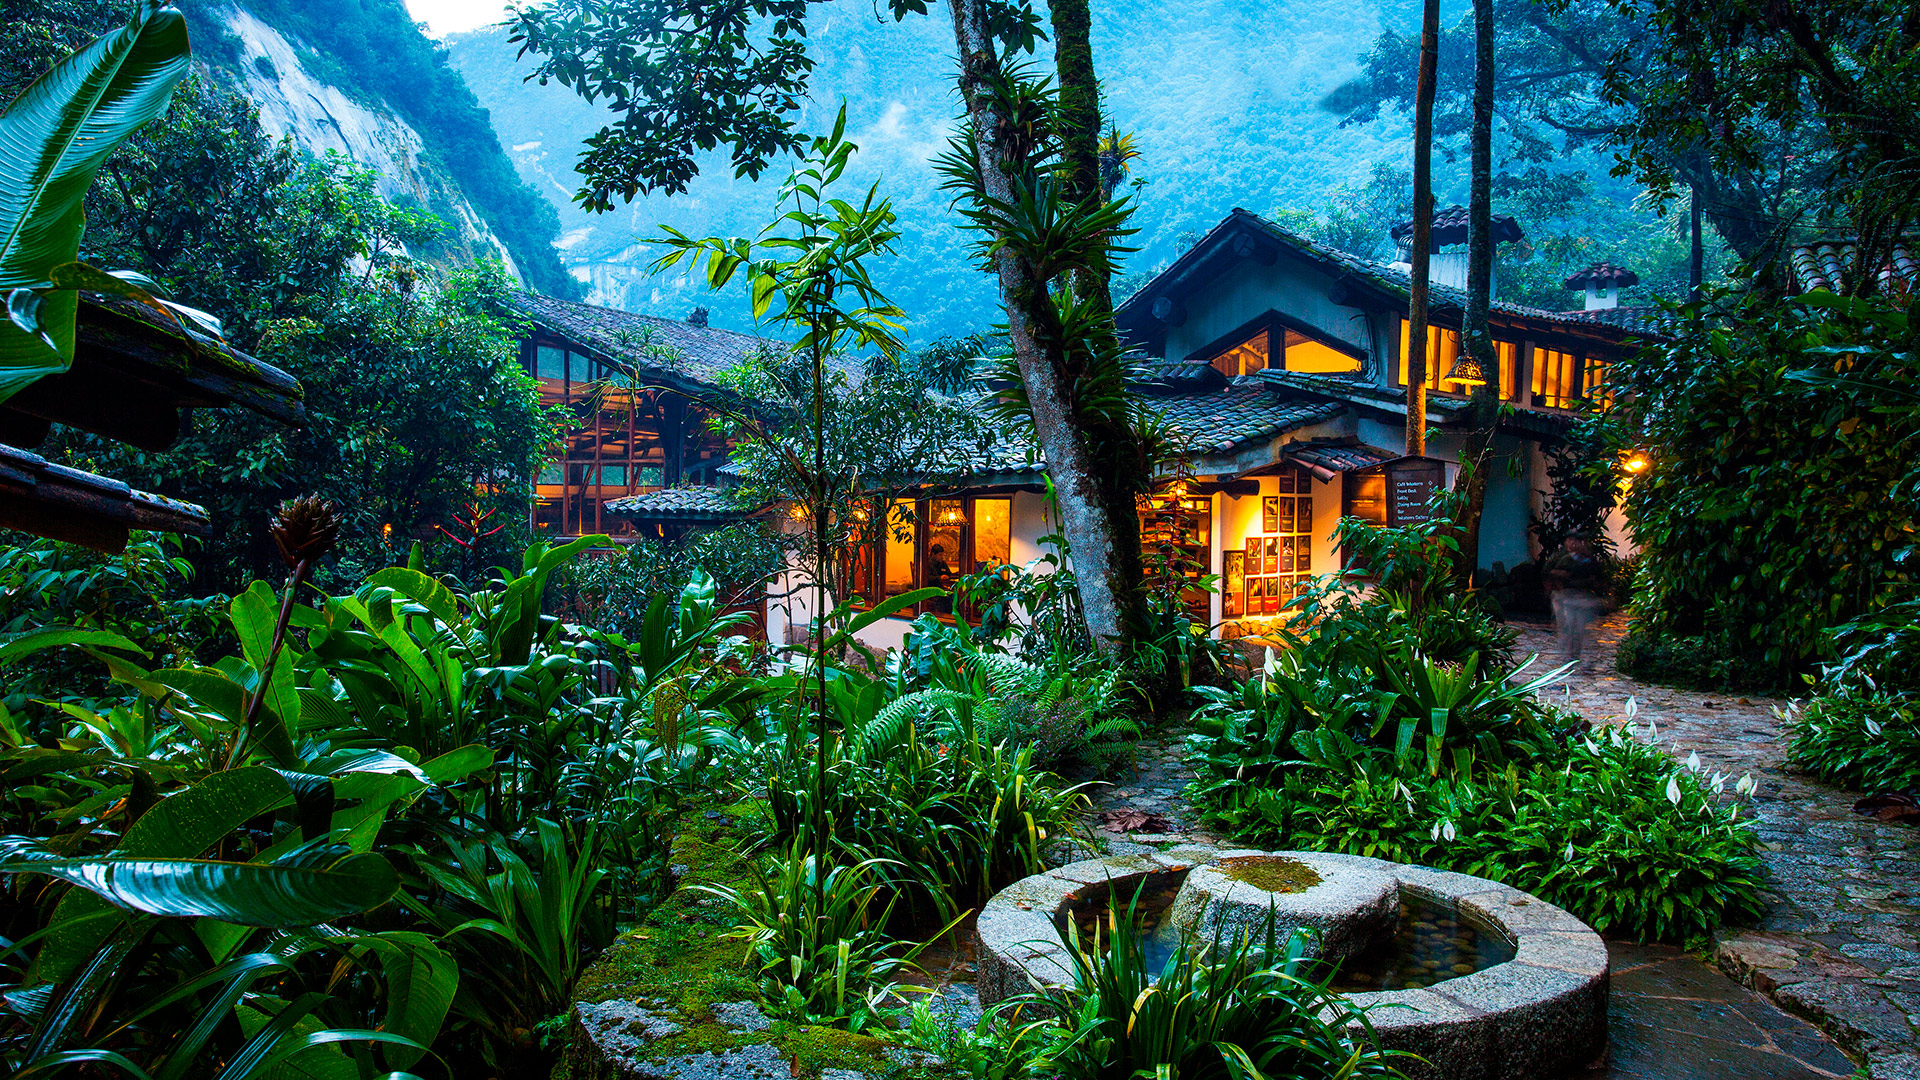 TRAVEL + LEISURE AWARDS INKATERRA AS ONE OF THE WORLD’S BEST HOTEL BRANDS